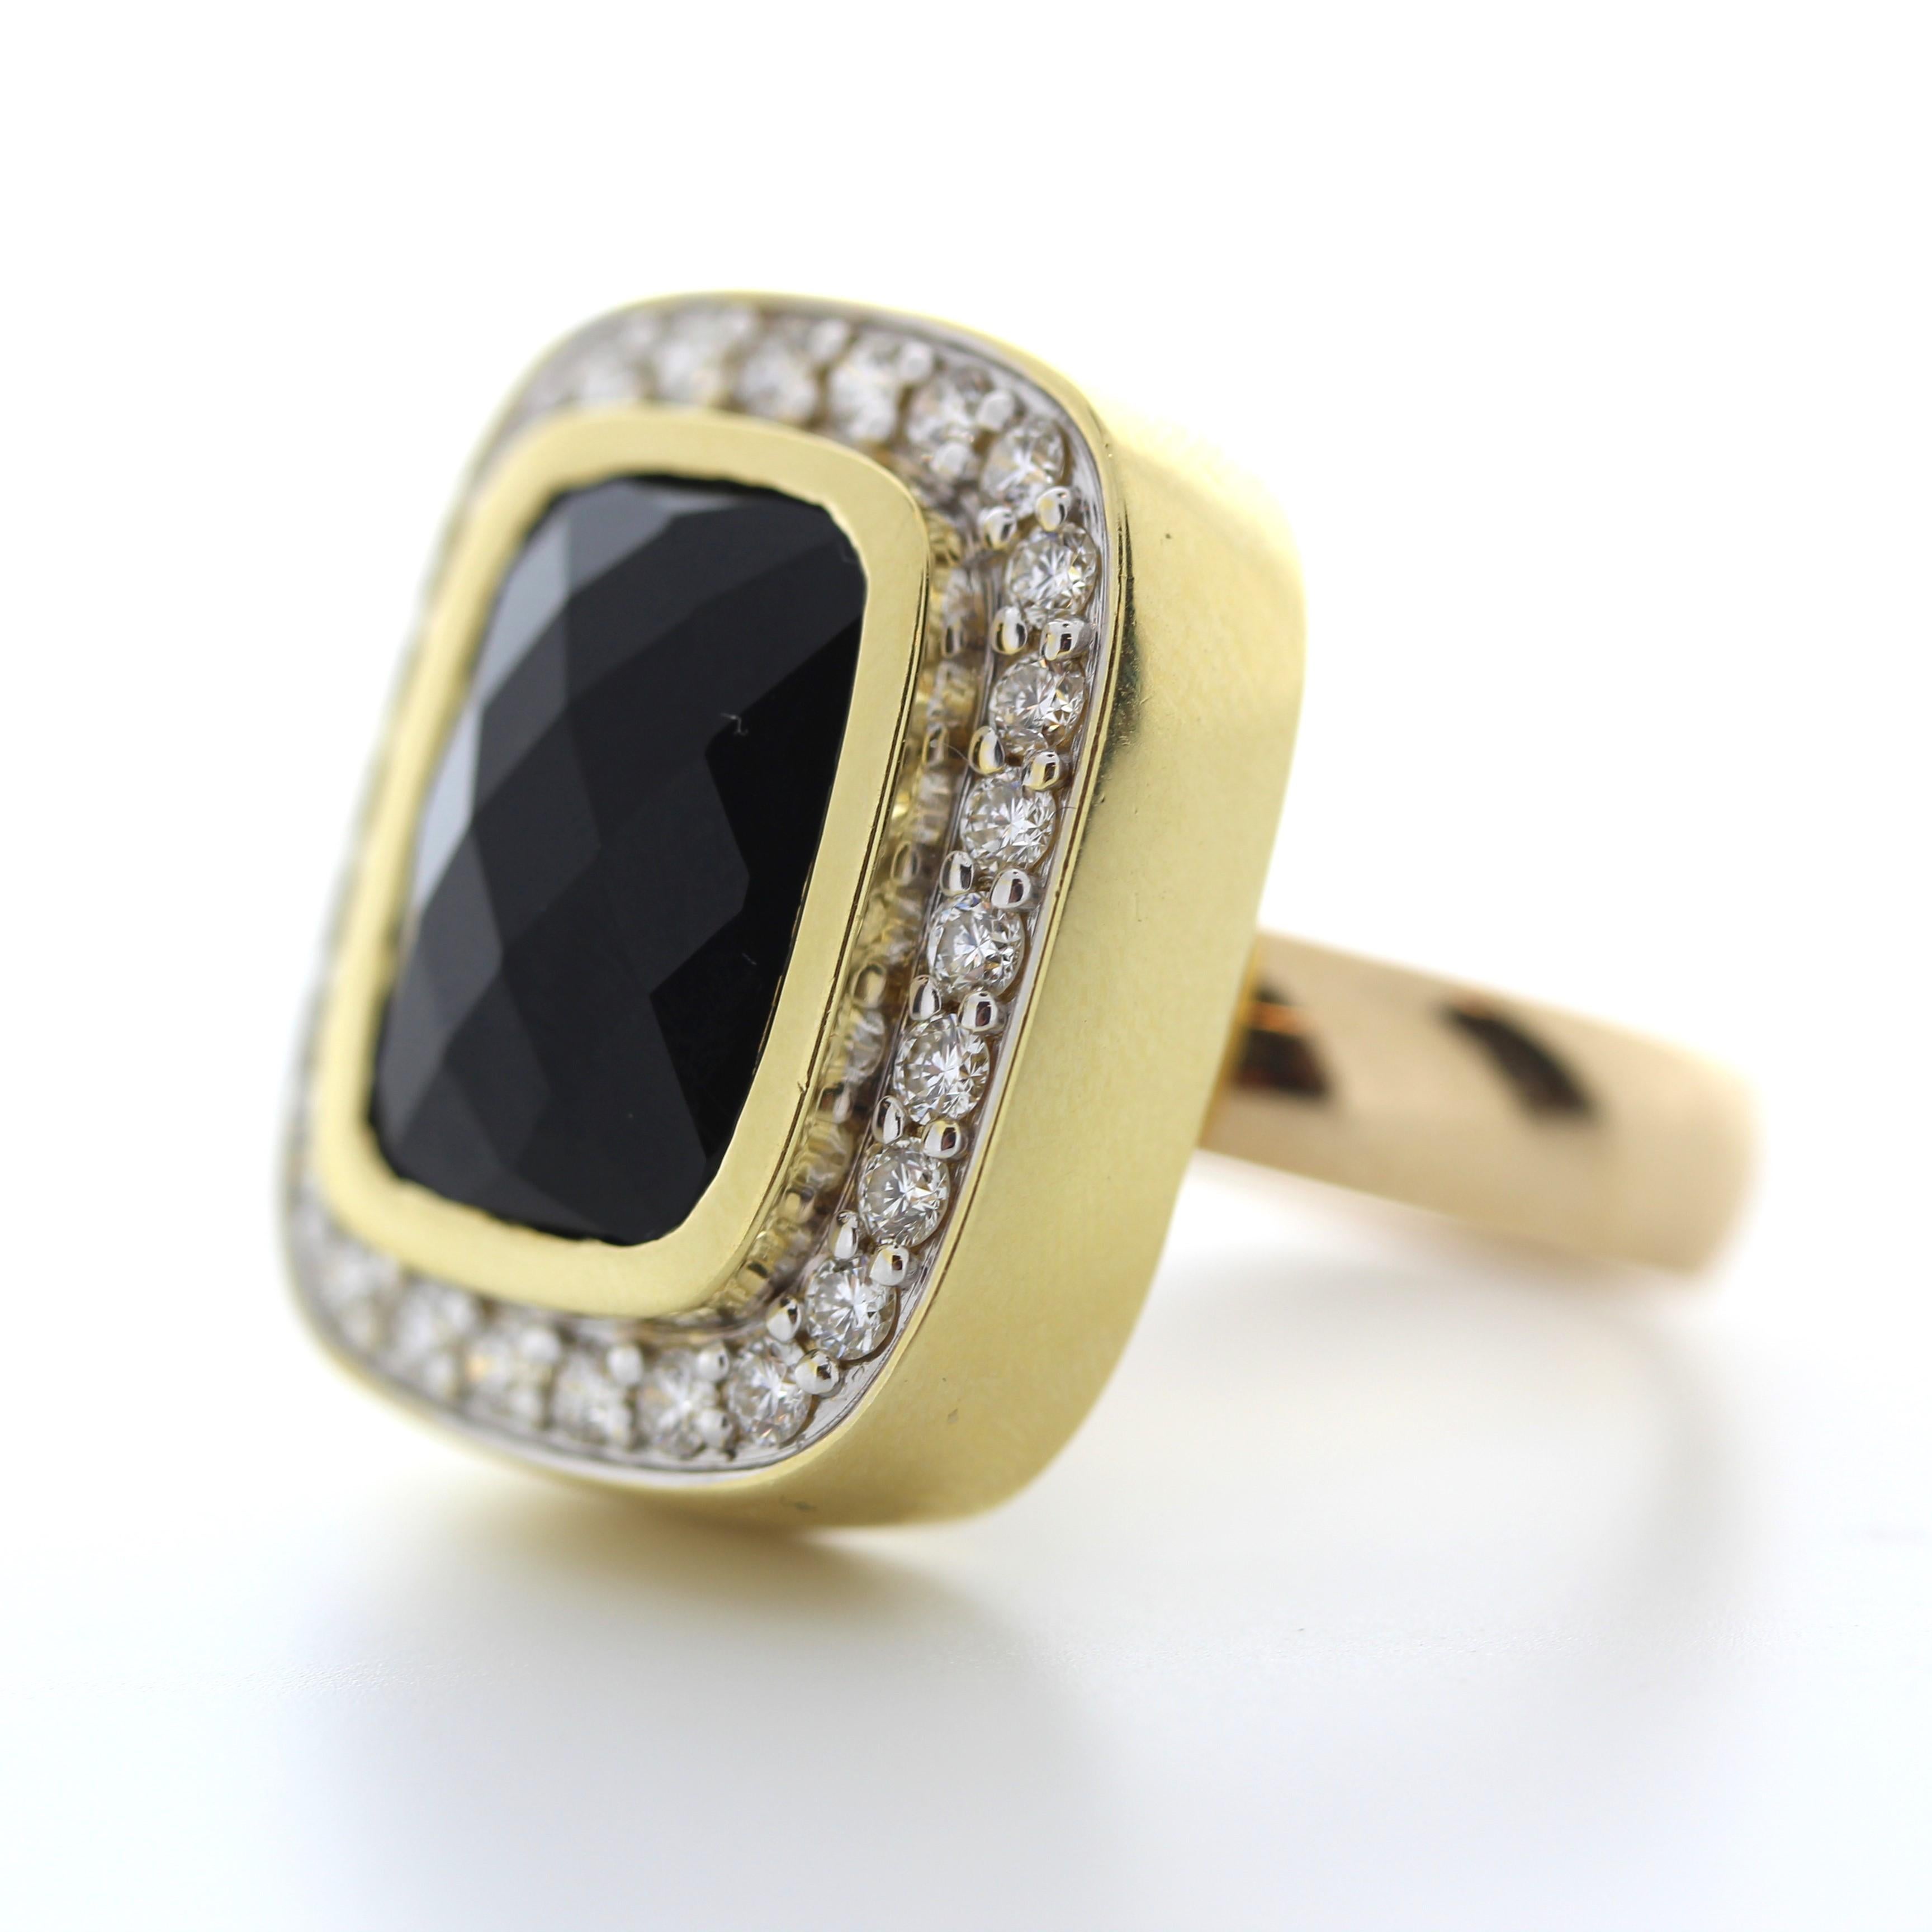 A celebration of a gorgeous shade of black onyx ring in glowing 14K yellow gold and the 1.00 carat total weight of 25 round diamonds that highlight the beauty of the center gem bring you a piece of beauty. A perfect match for elegant evening wear,